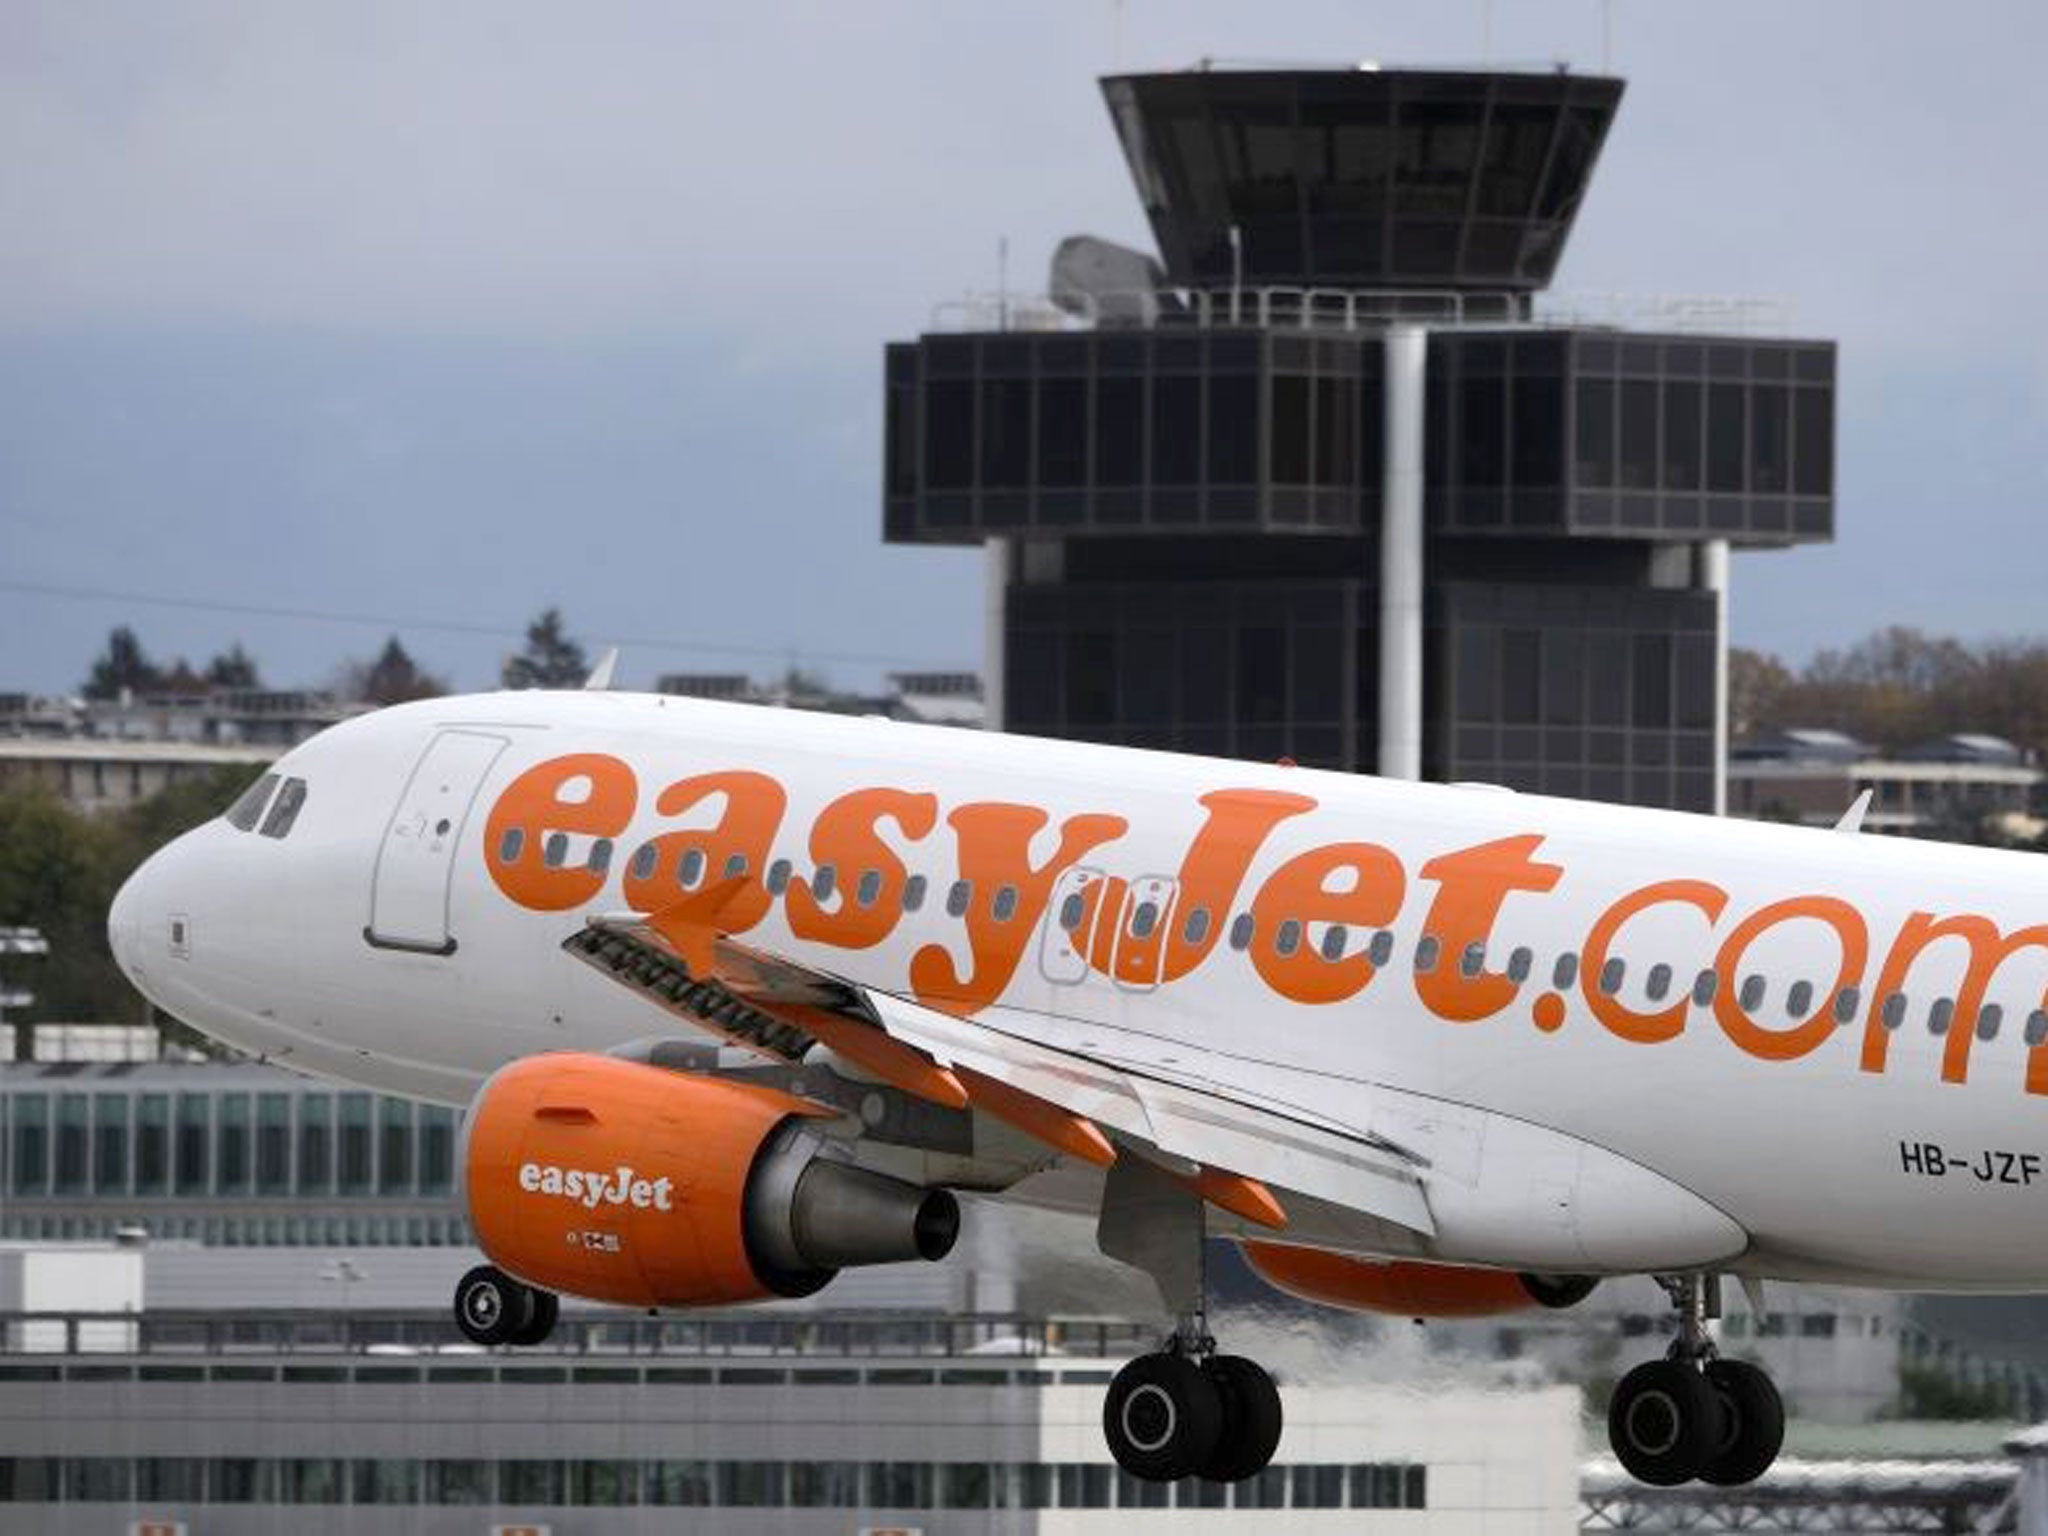 EasyJet have said the plane was not compromised